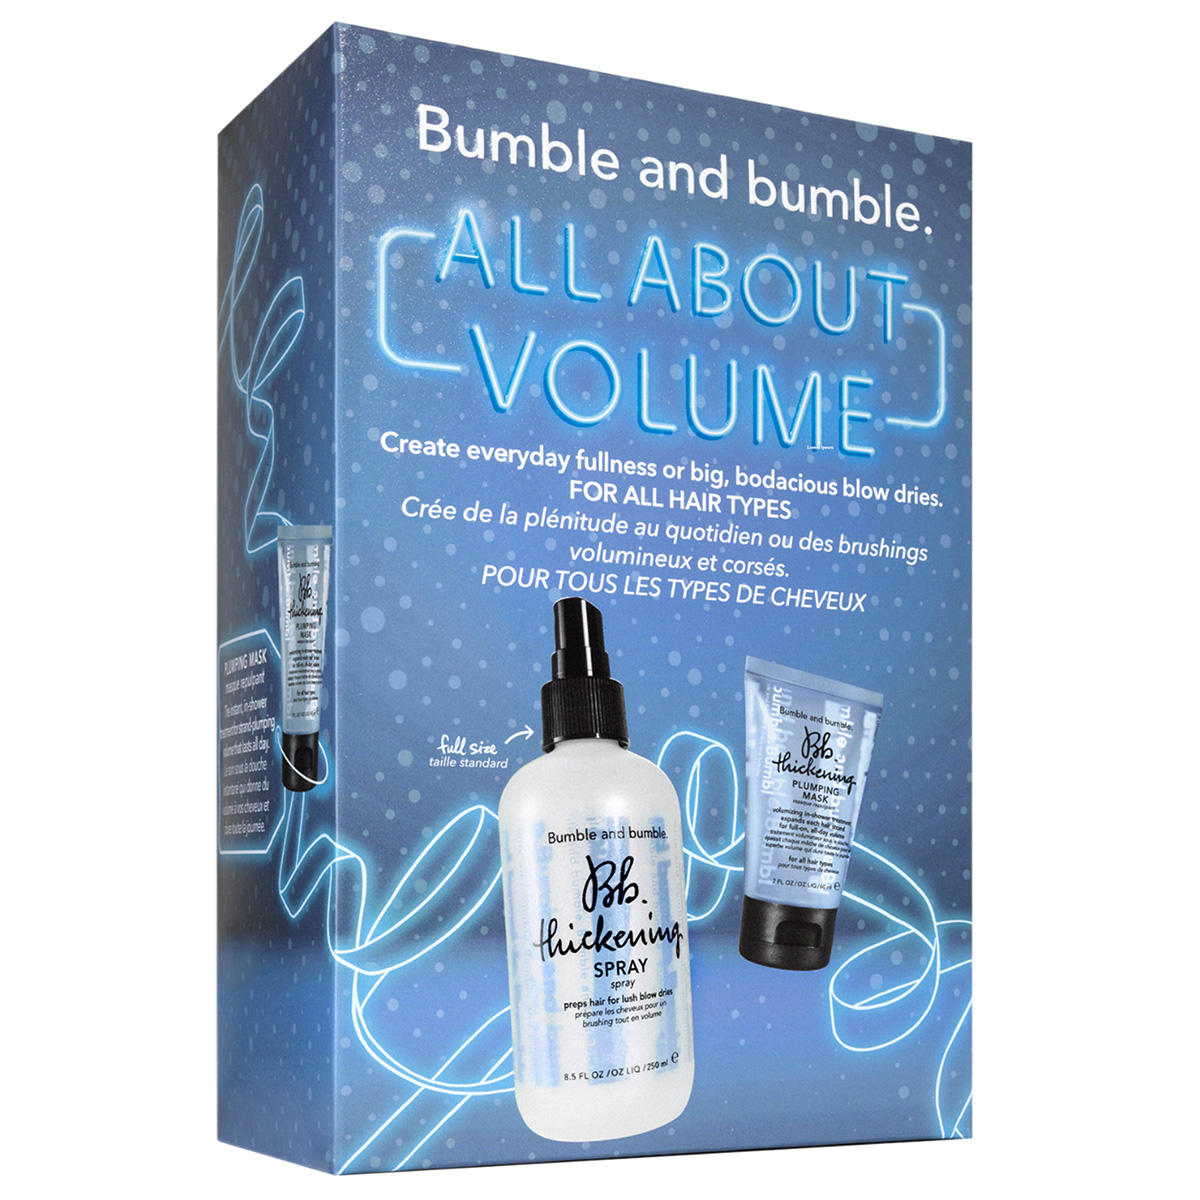 Bumble and bumble Bb. Thickening All About Volume Set  - 3